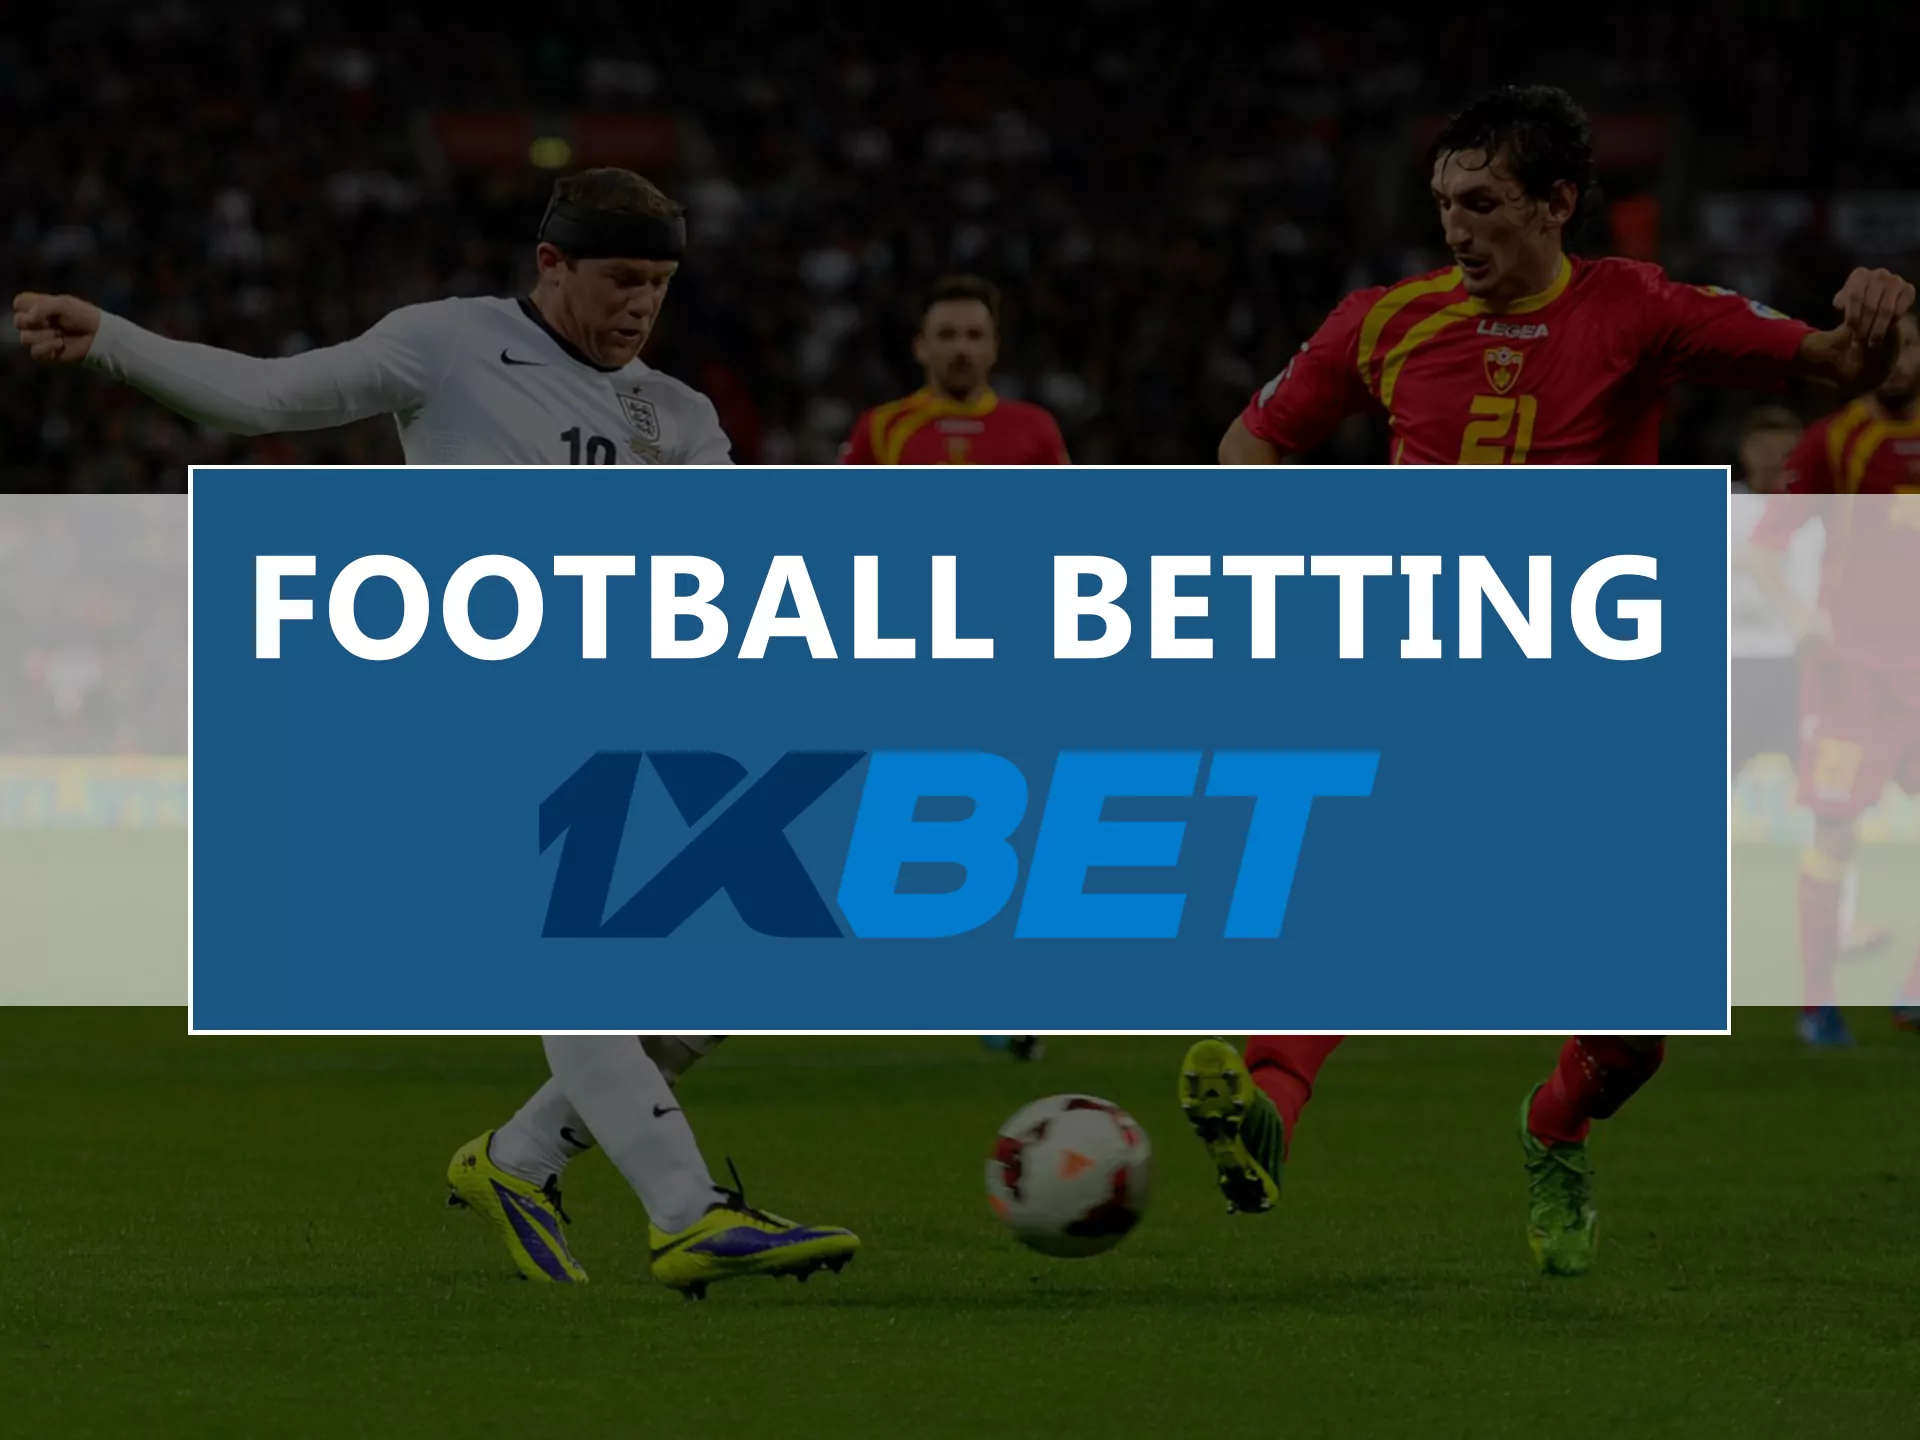 Football Betting betting on 1xbet.